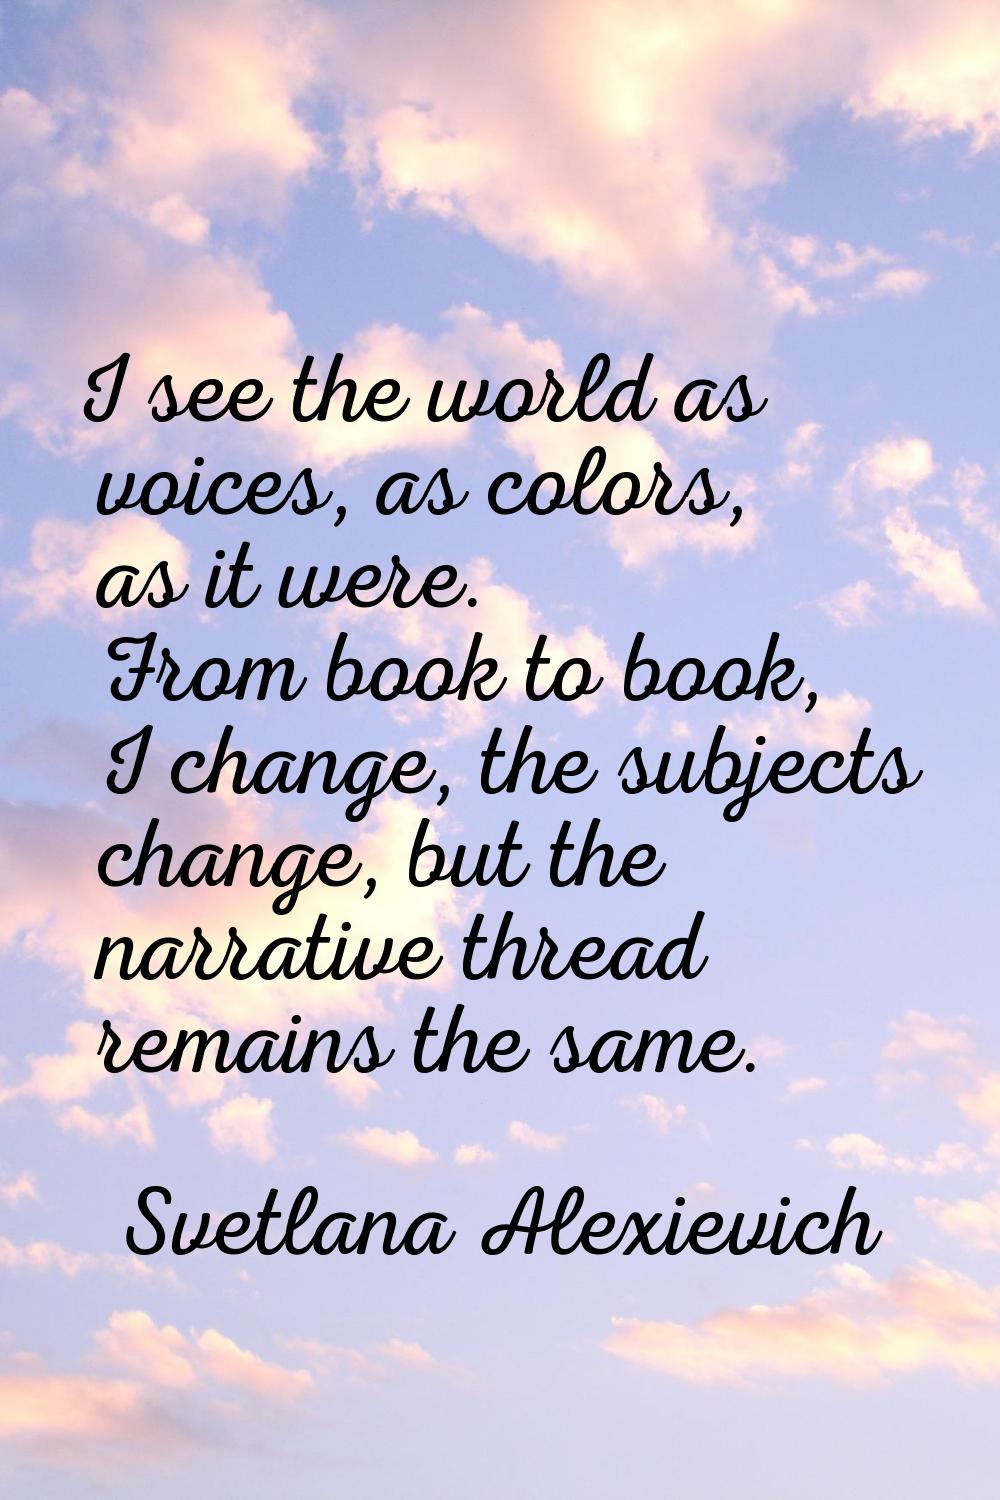 I see the world as voices, as colors, as it were. From book to book, I change, the subjects change,